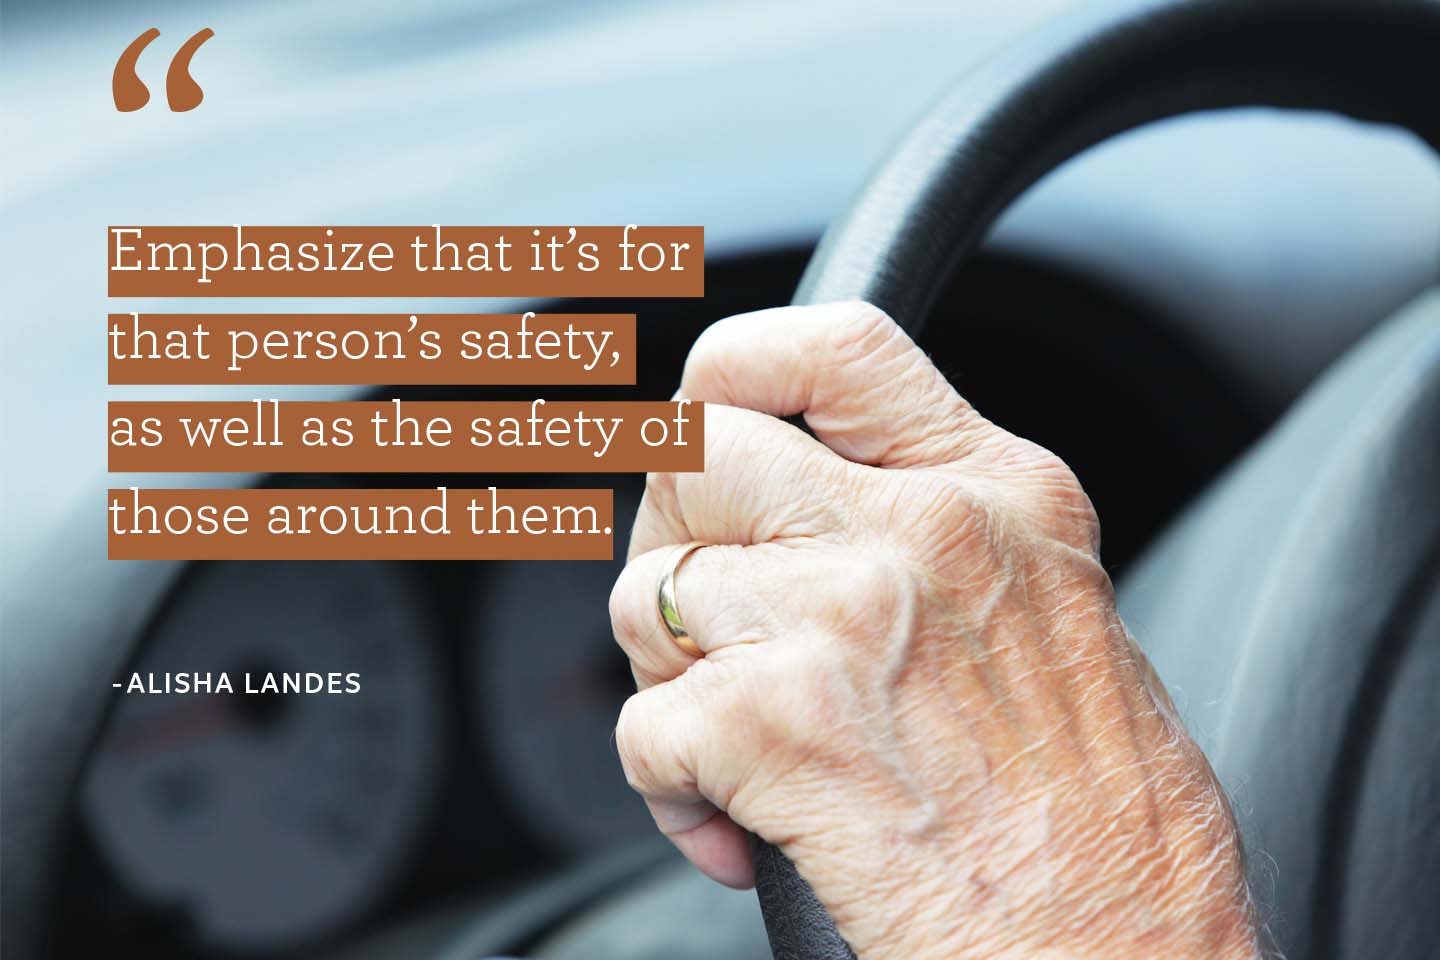 mature adult hand on steering wheel in car safety quote chattanooga